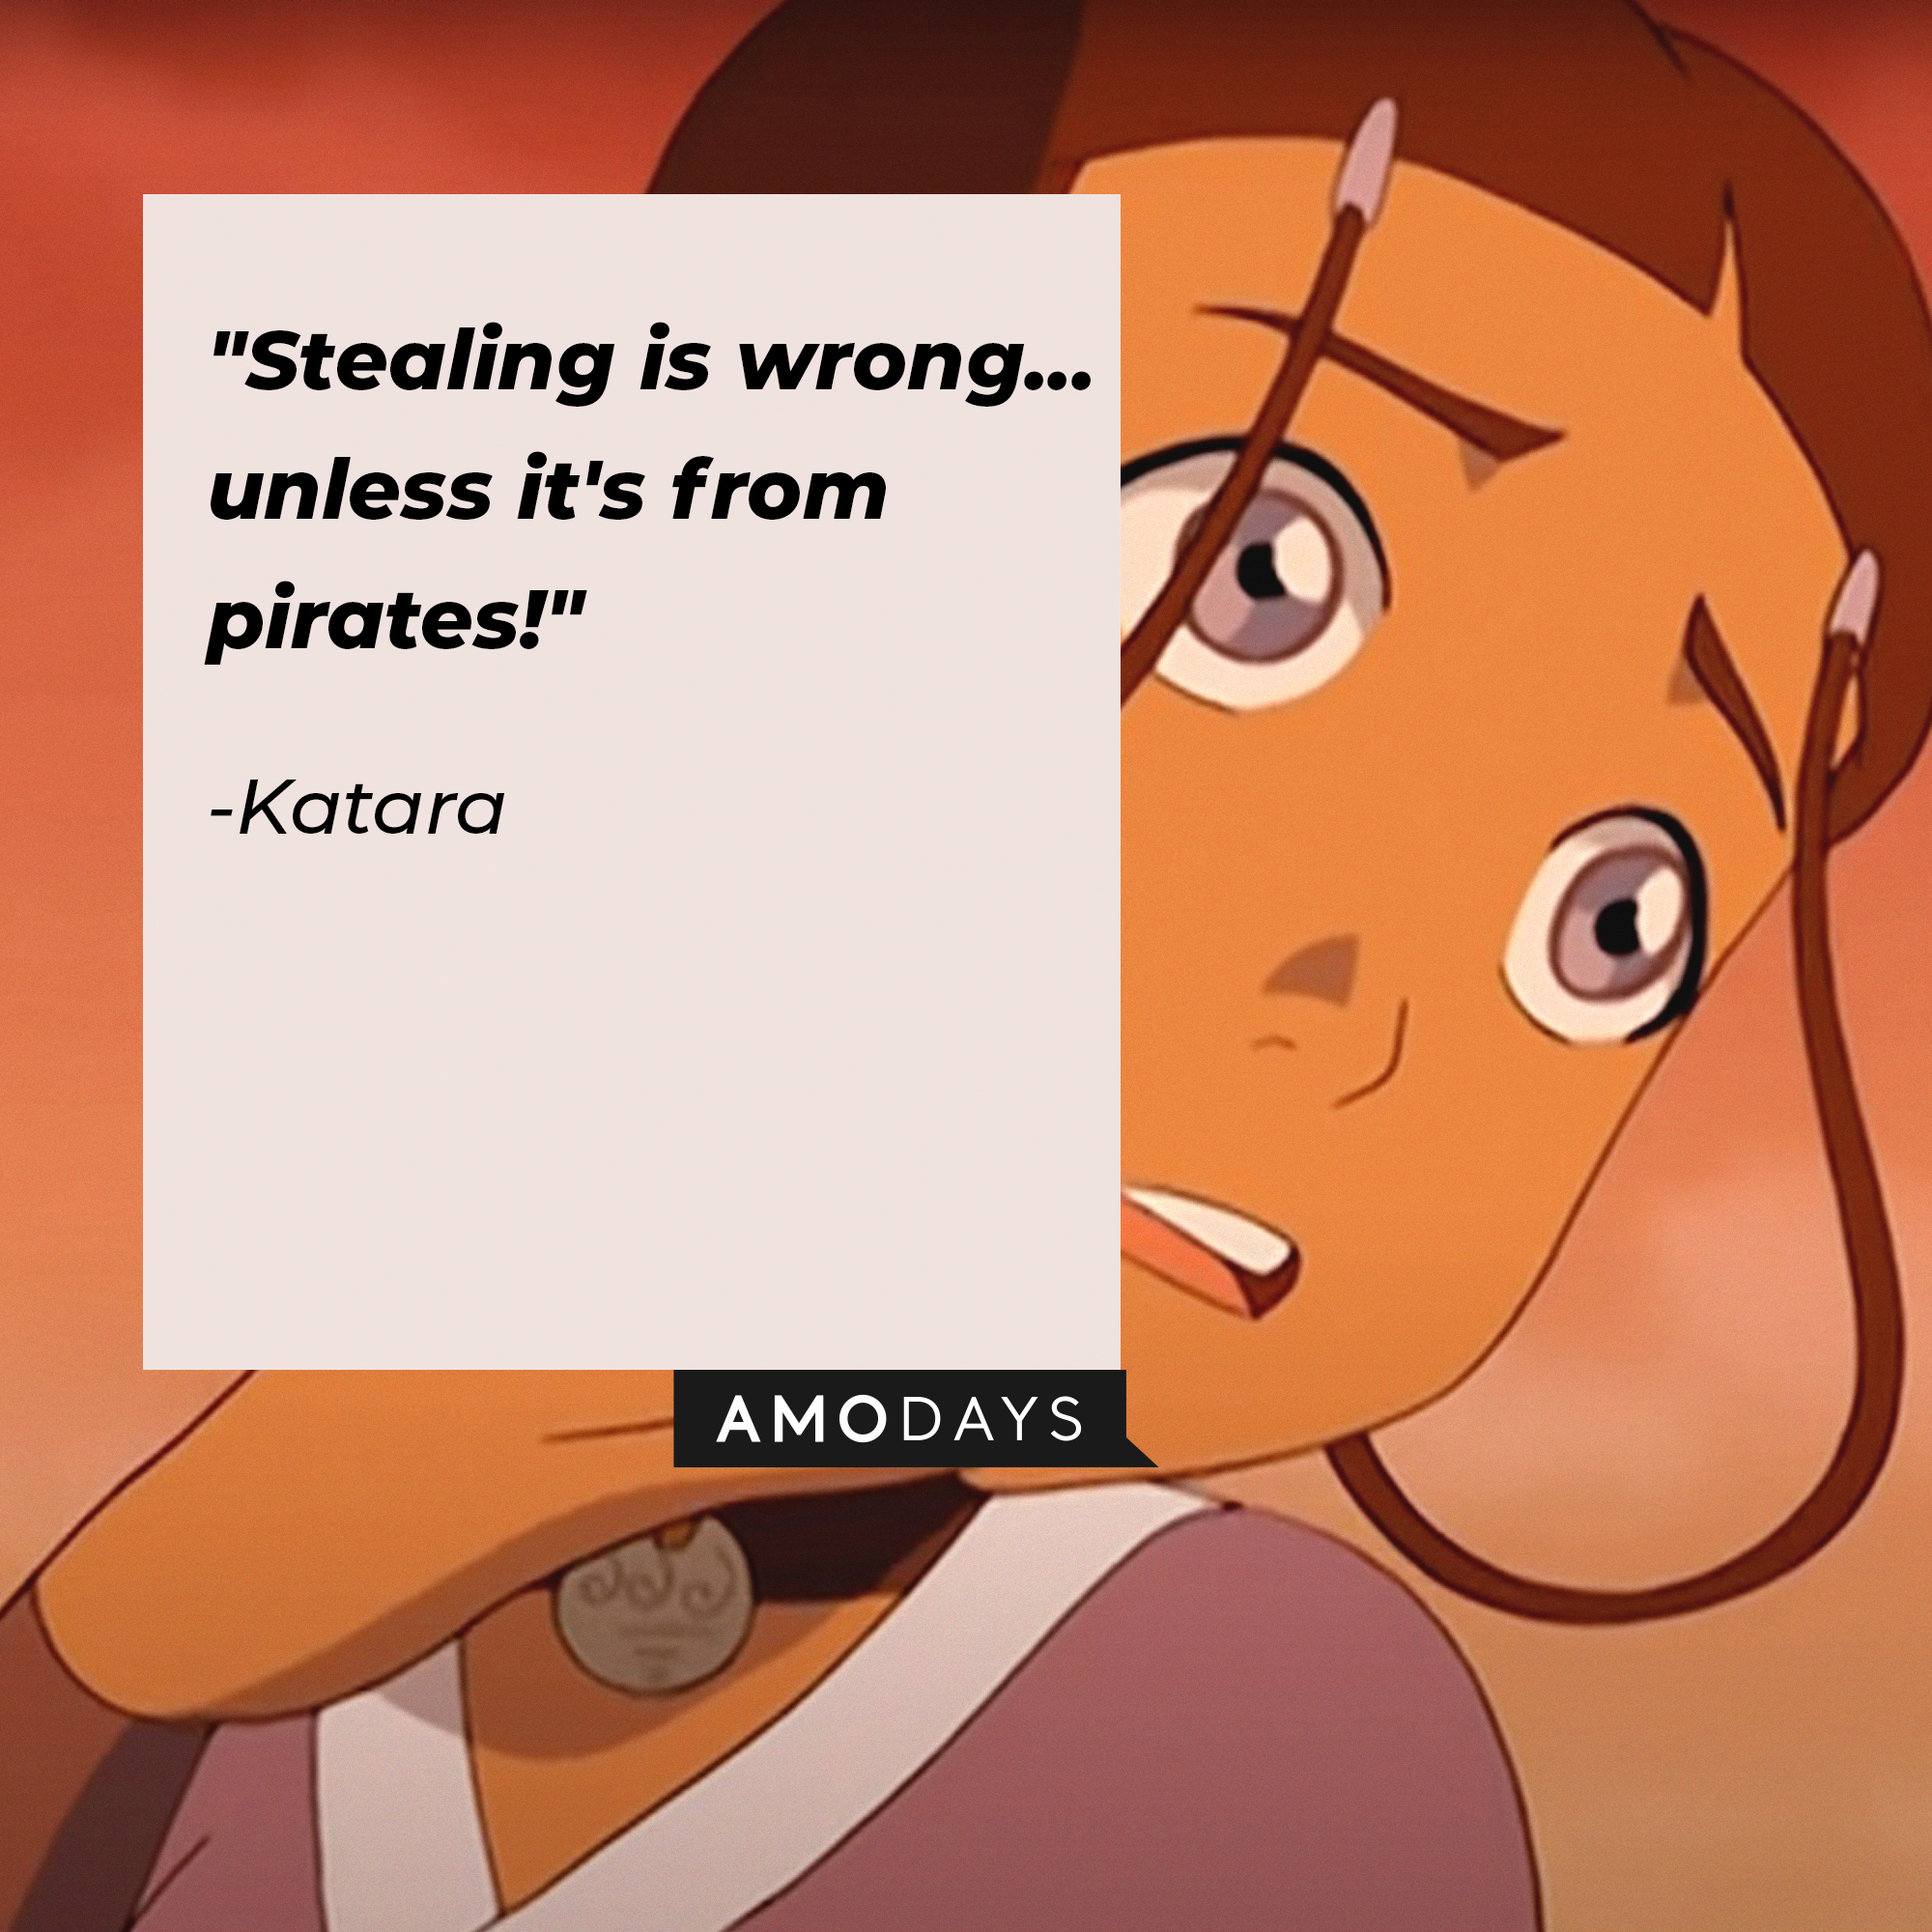 Katara's quote: "Stealing is wrong... unless it's from pirates!" | Source: Youtube.com/TeamAvatar